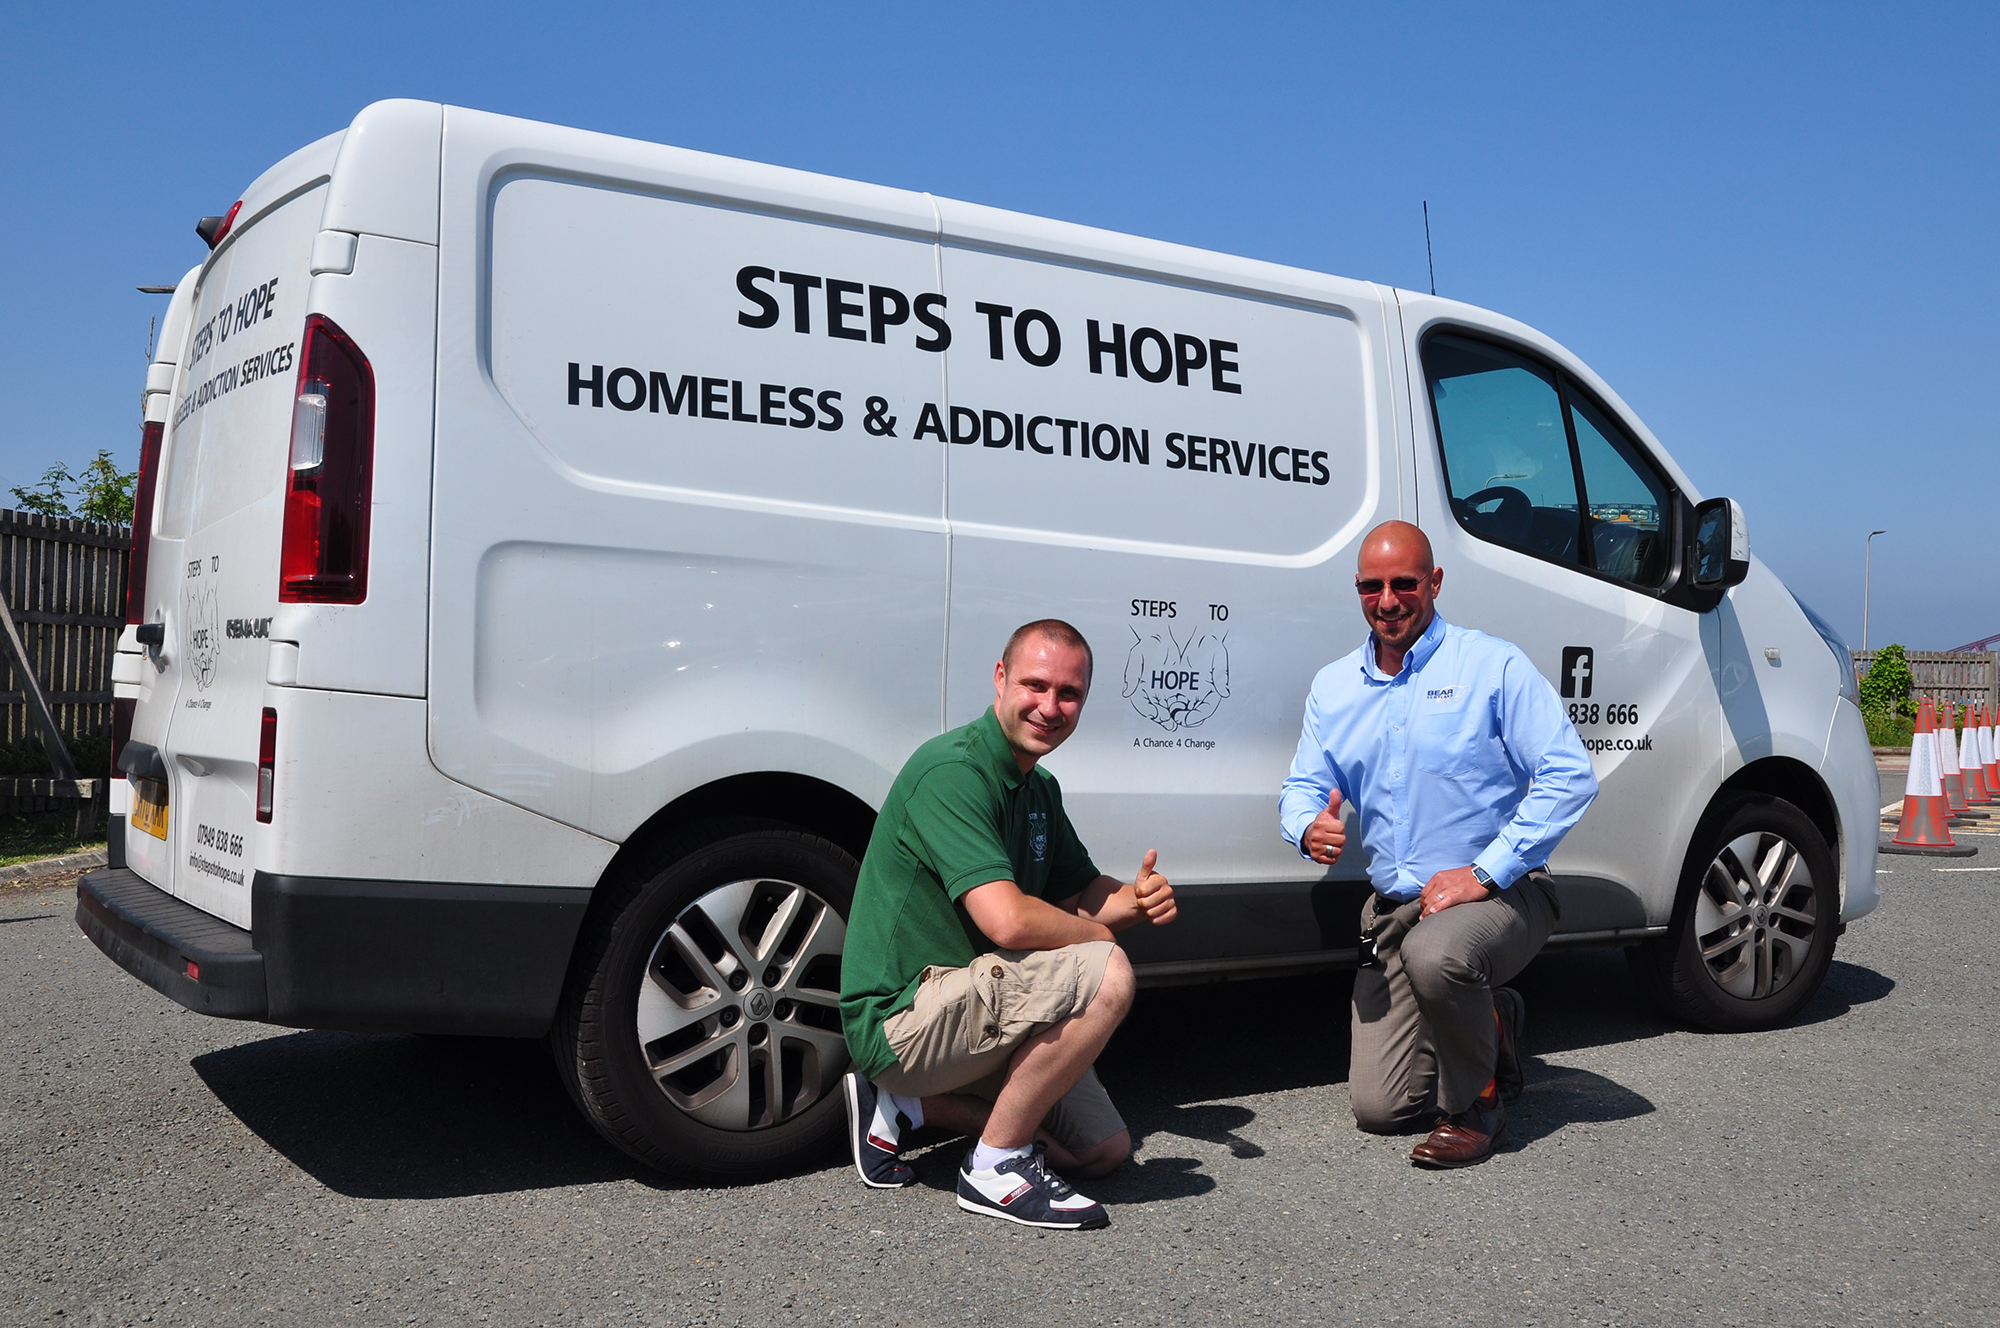 STEPS TO HOPE RECEIVES £1,000 DONATION FROM BEAR SCOTLAND